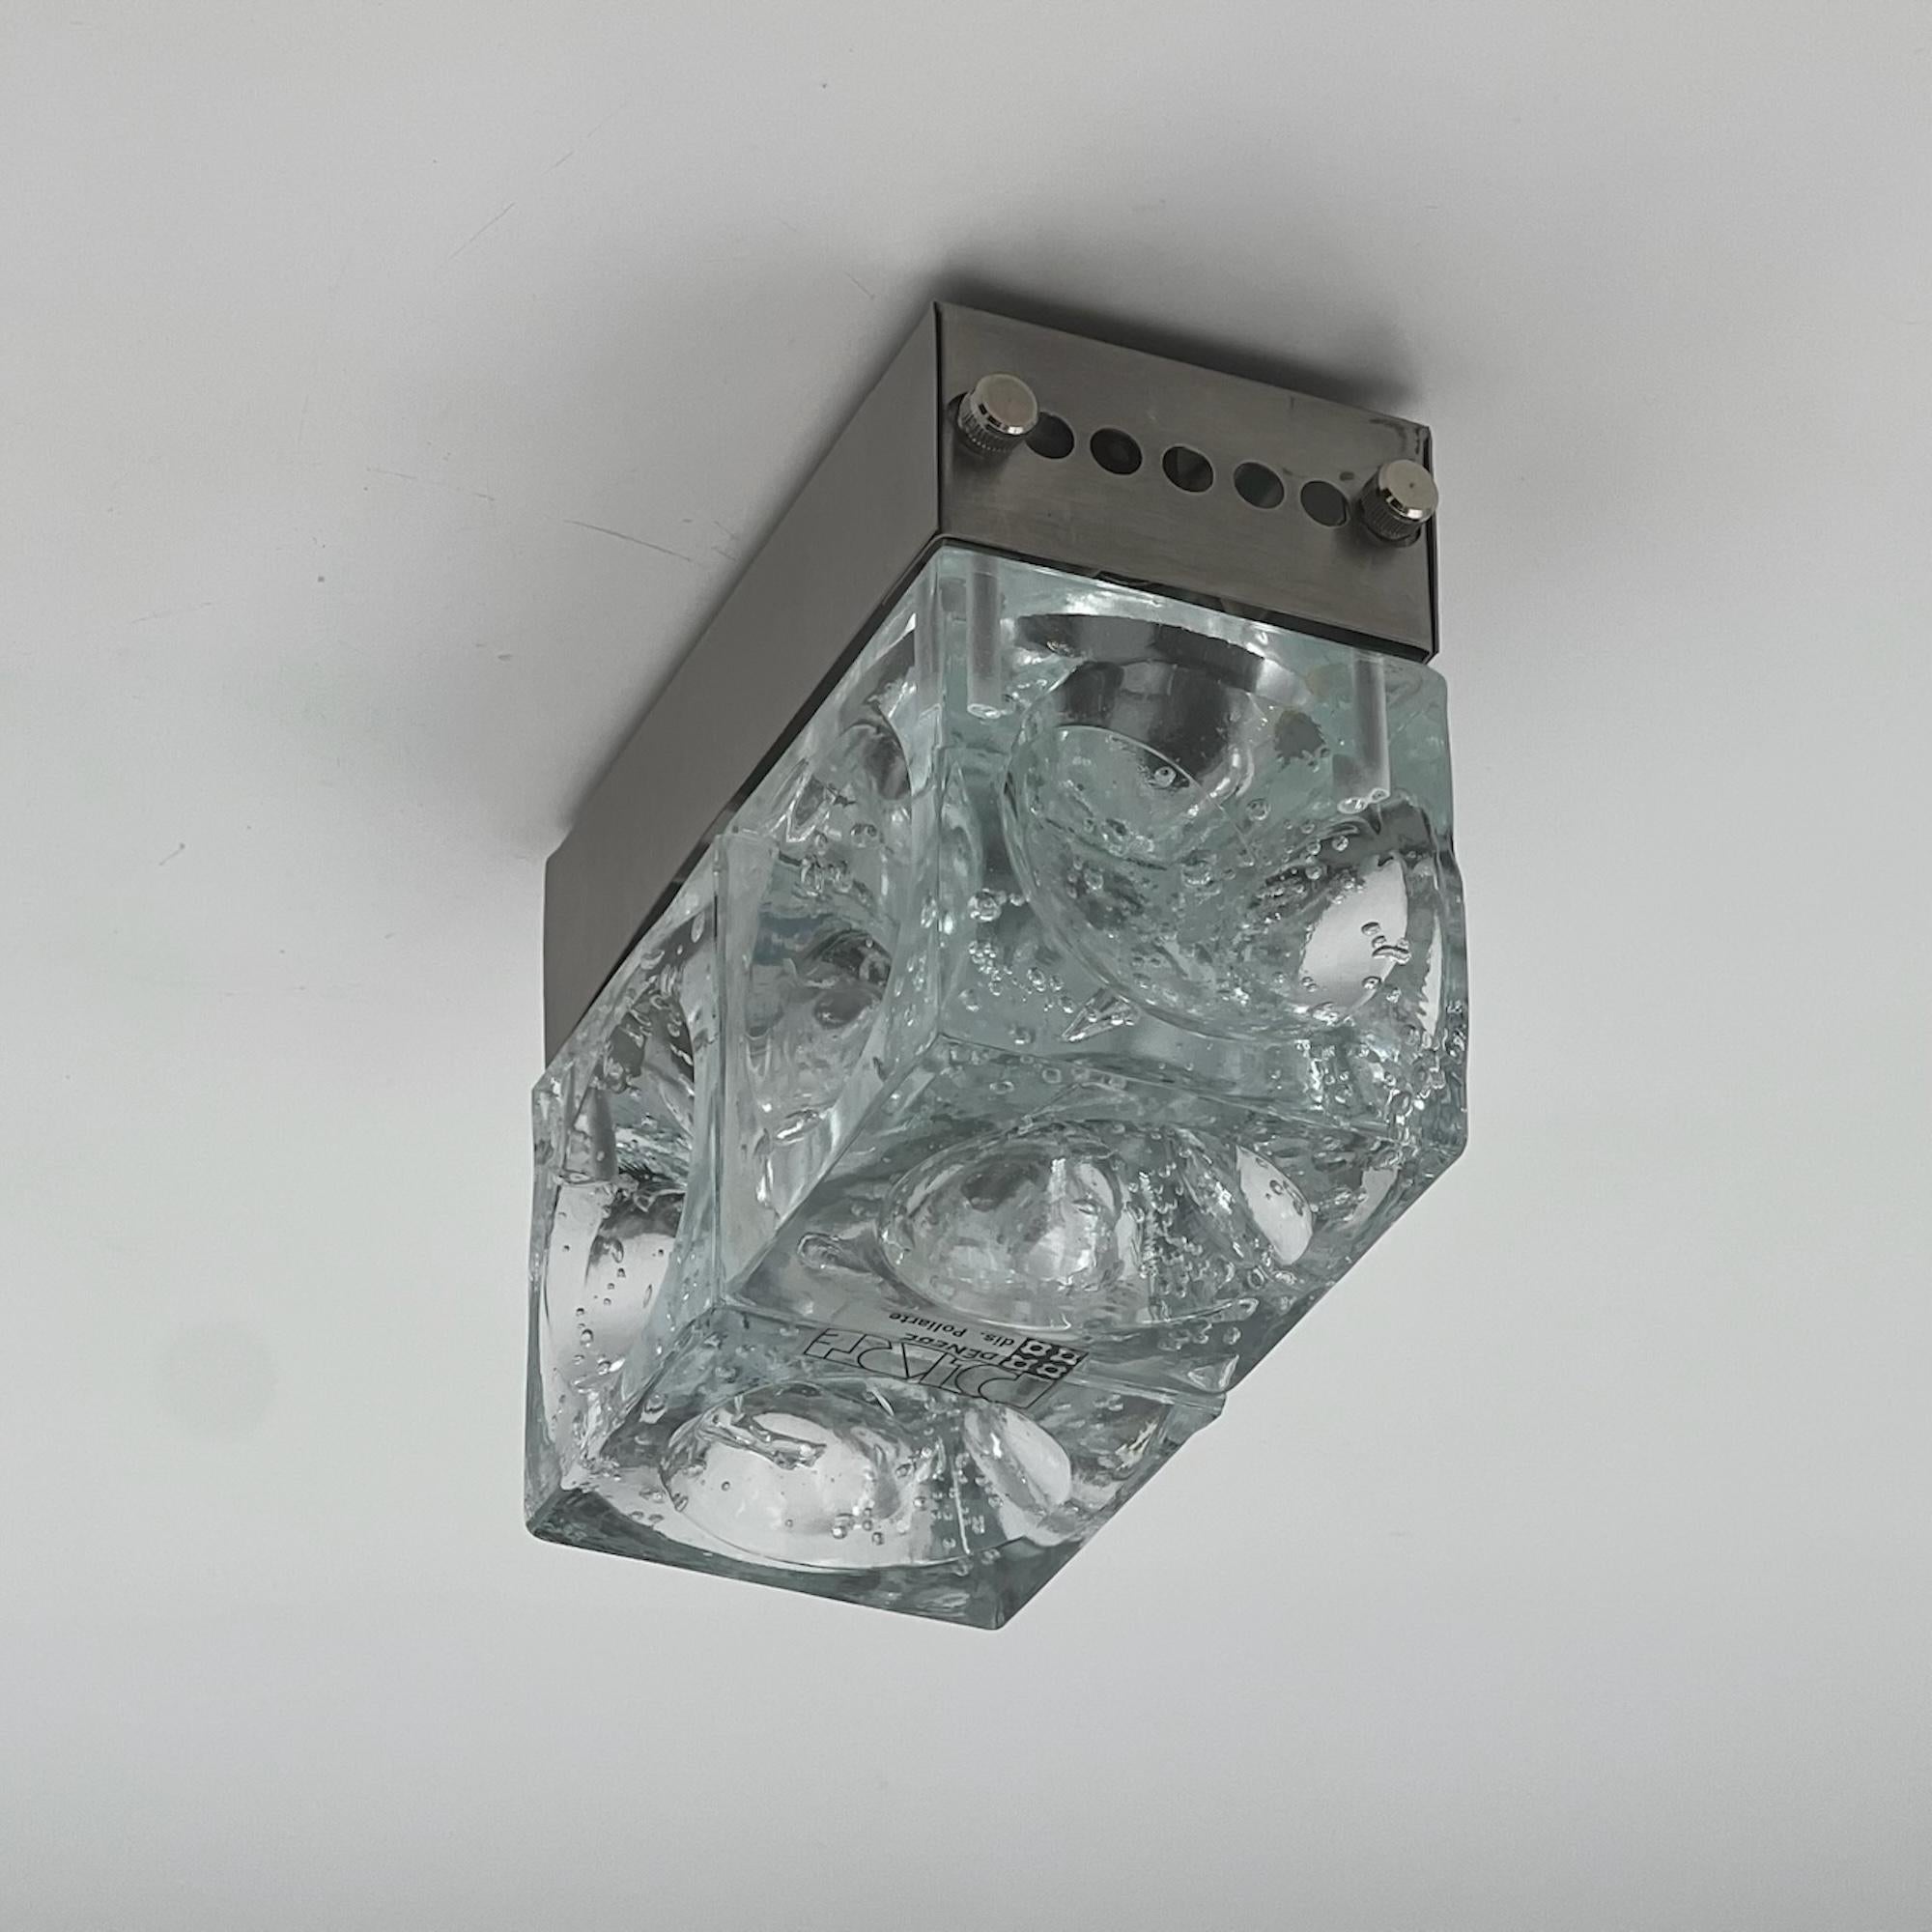 Italian Iconic Poliarte Lamp 'Denebe' - Handmade Glass Cubes Made in Italy For Sale